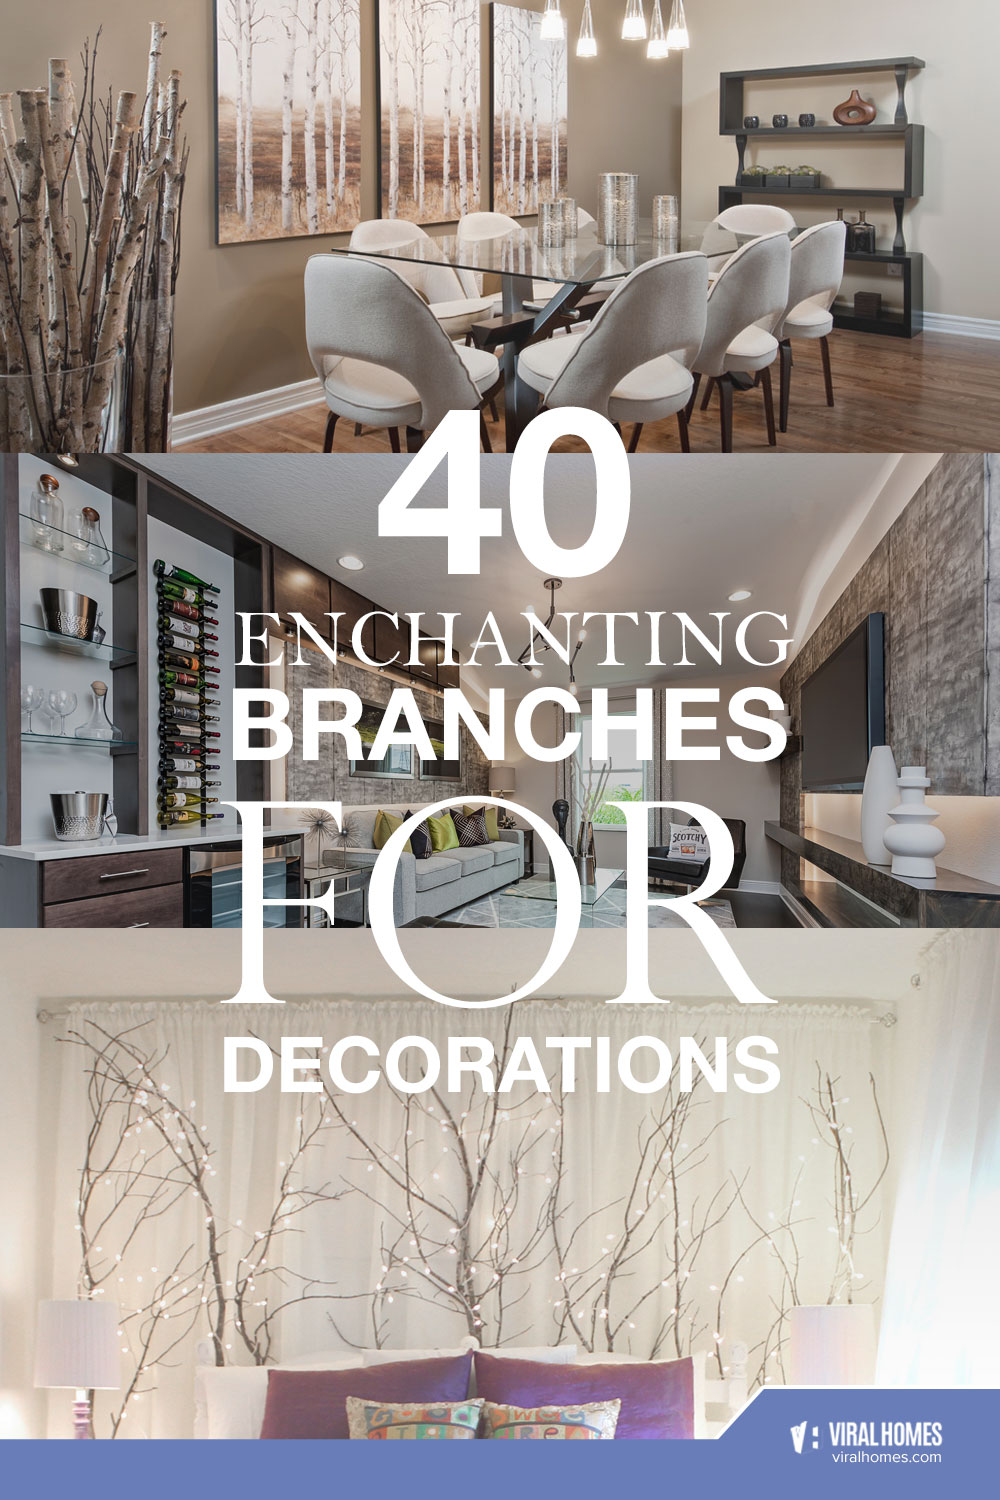 Enchanting Branches for Decoration We Can Adorn Our Homes